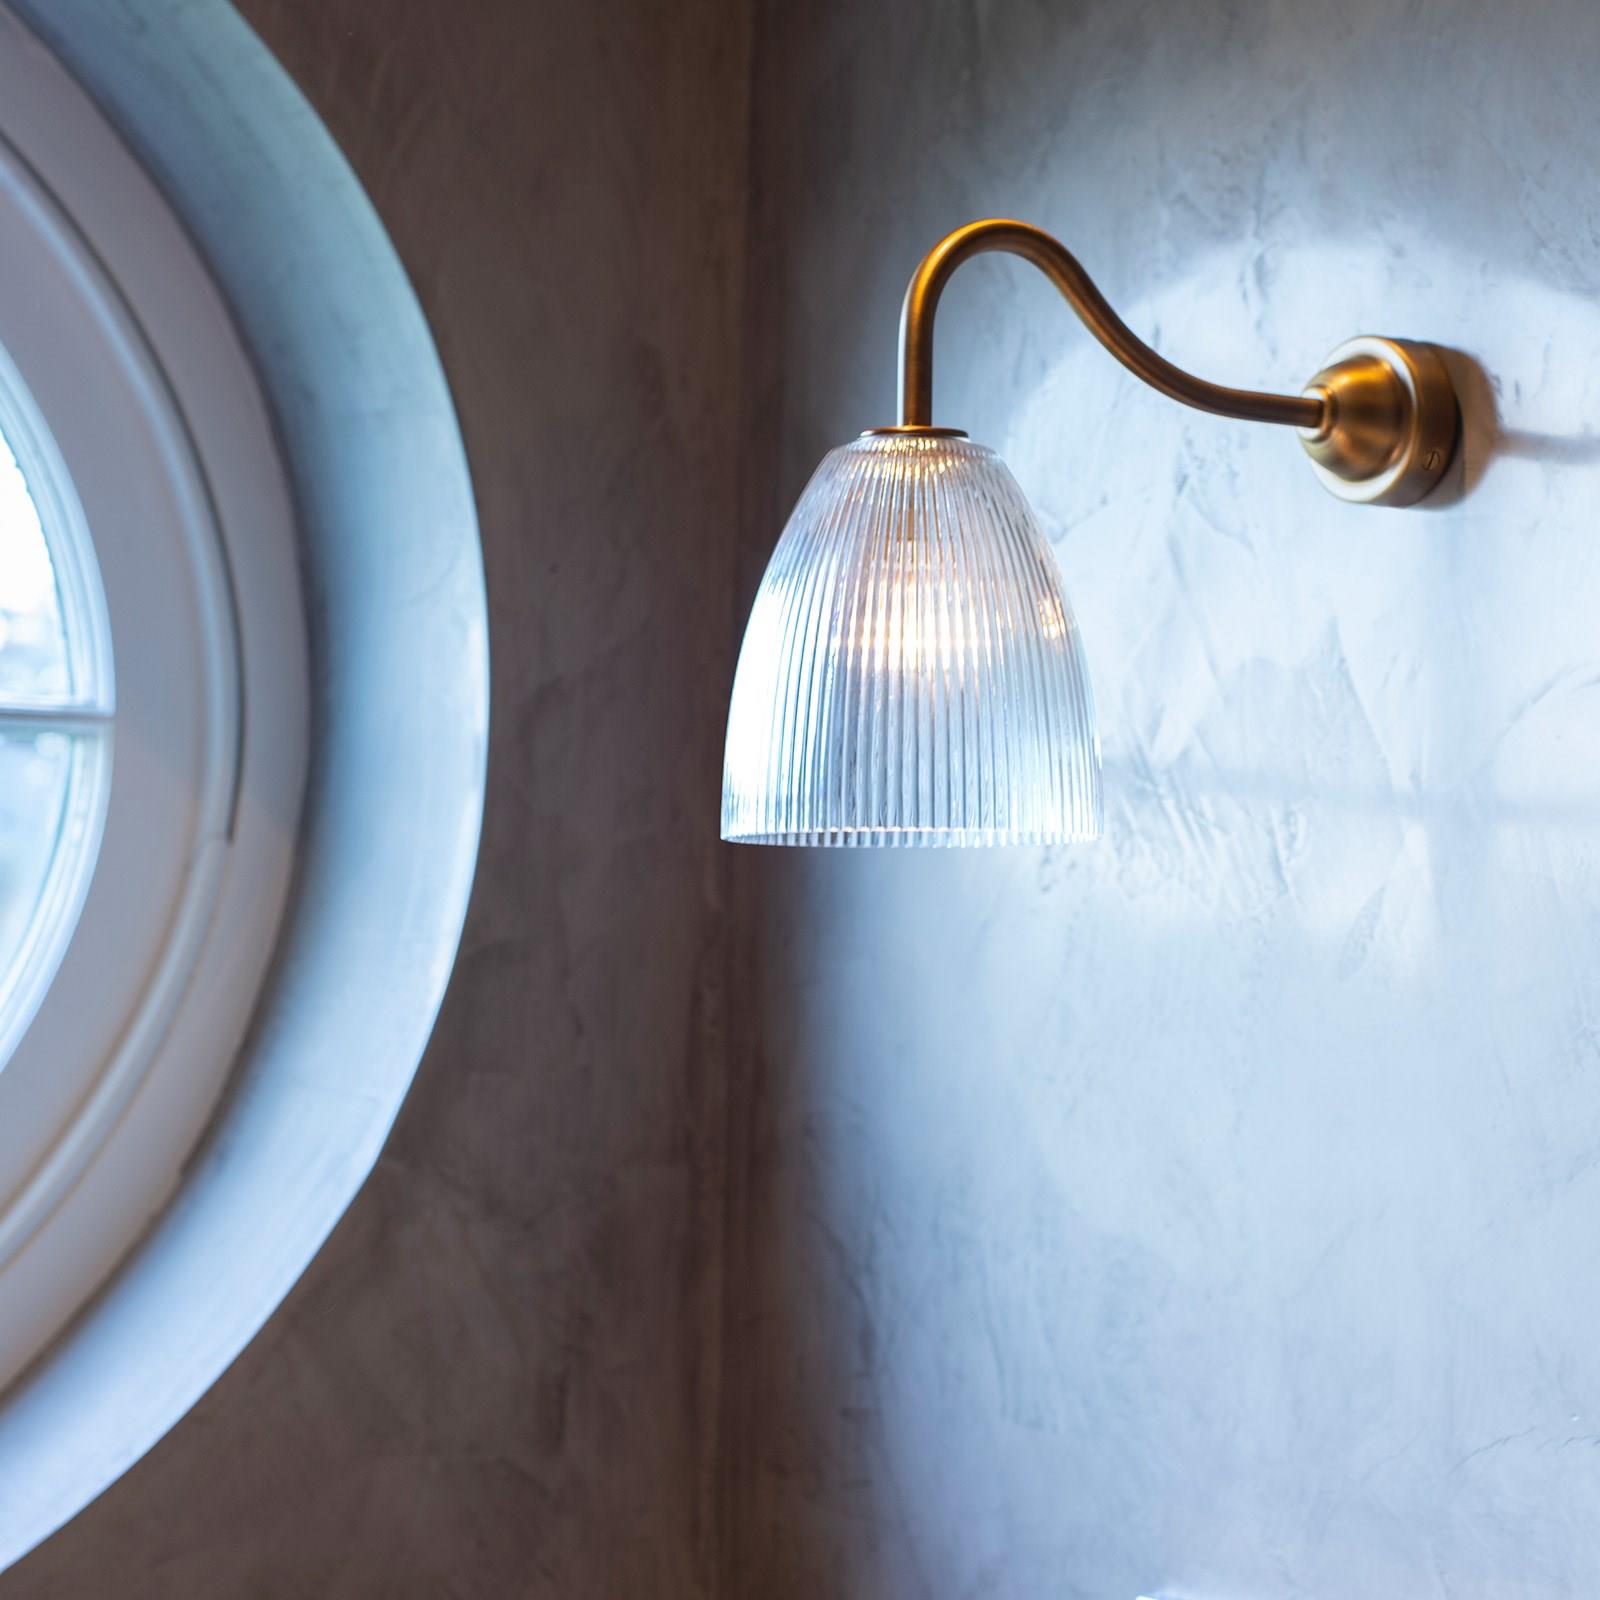 TINY QILIN BATHROOM Wall Light - Swan Neck by Pooky in Antique Brass